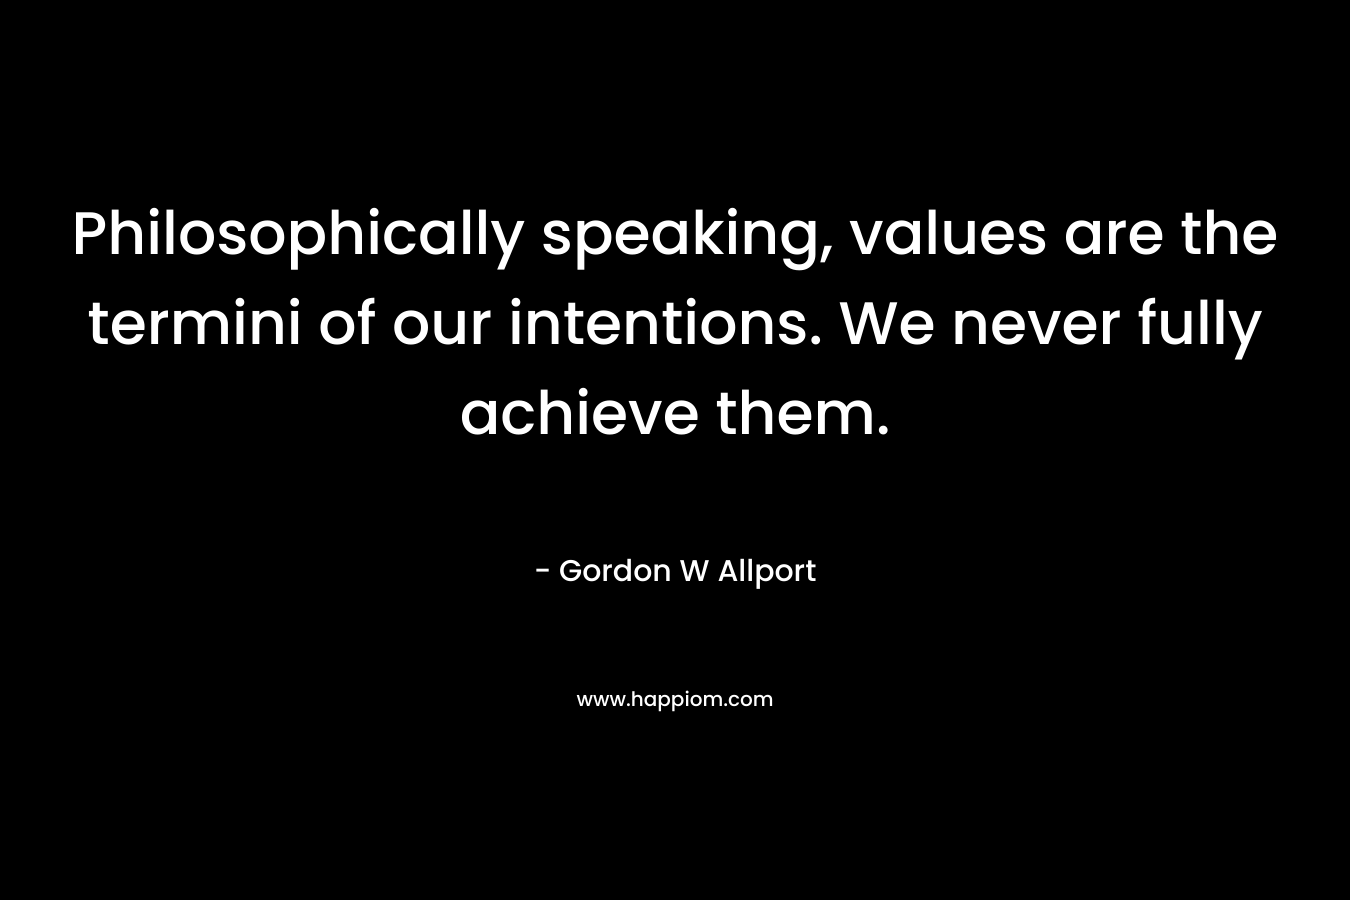 Philosophically speaking, values are the termini of our intentions. We never fully achieve them. – Gordon W Allport